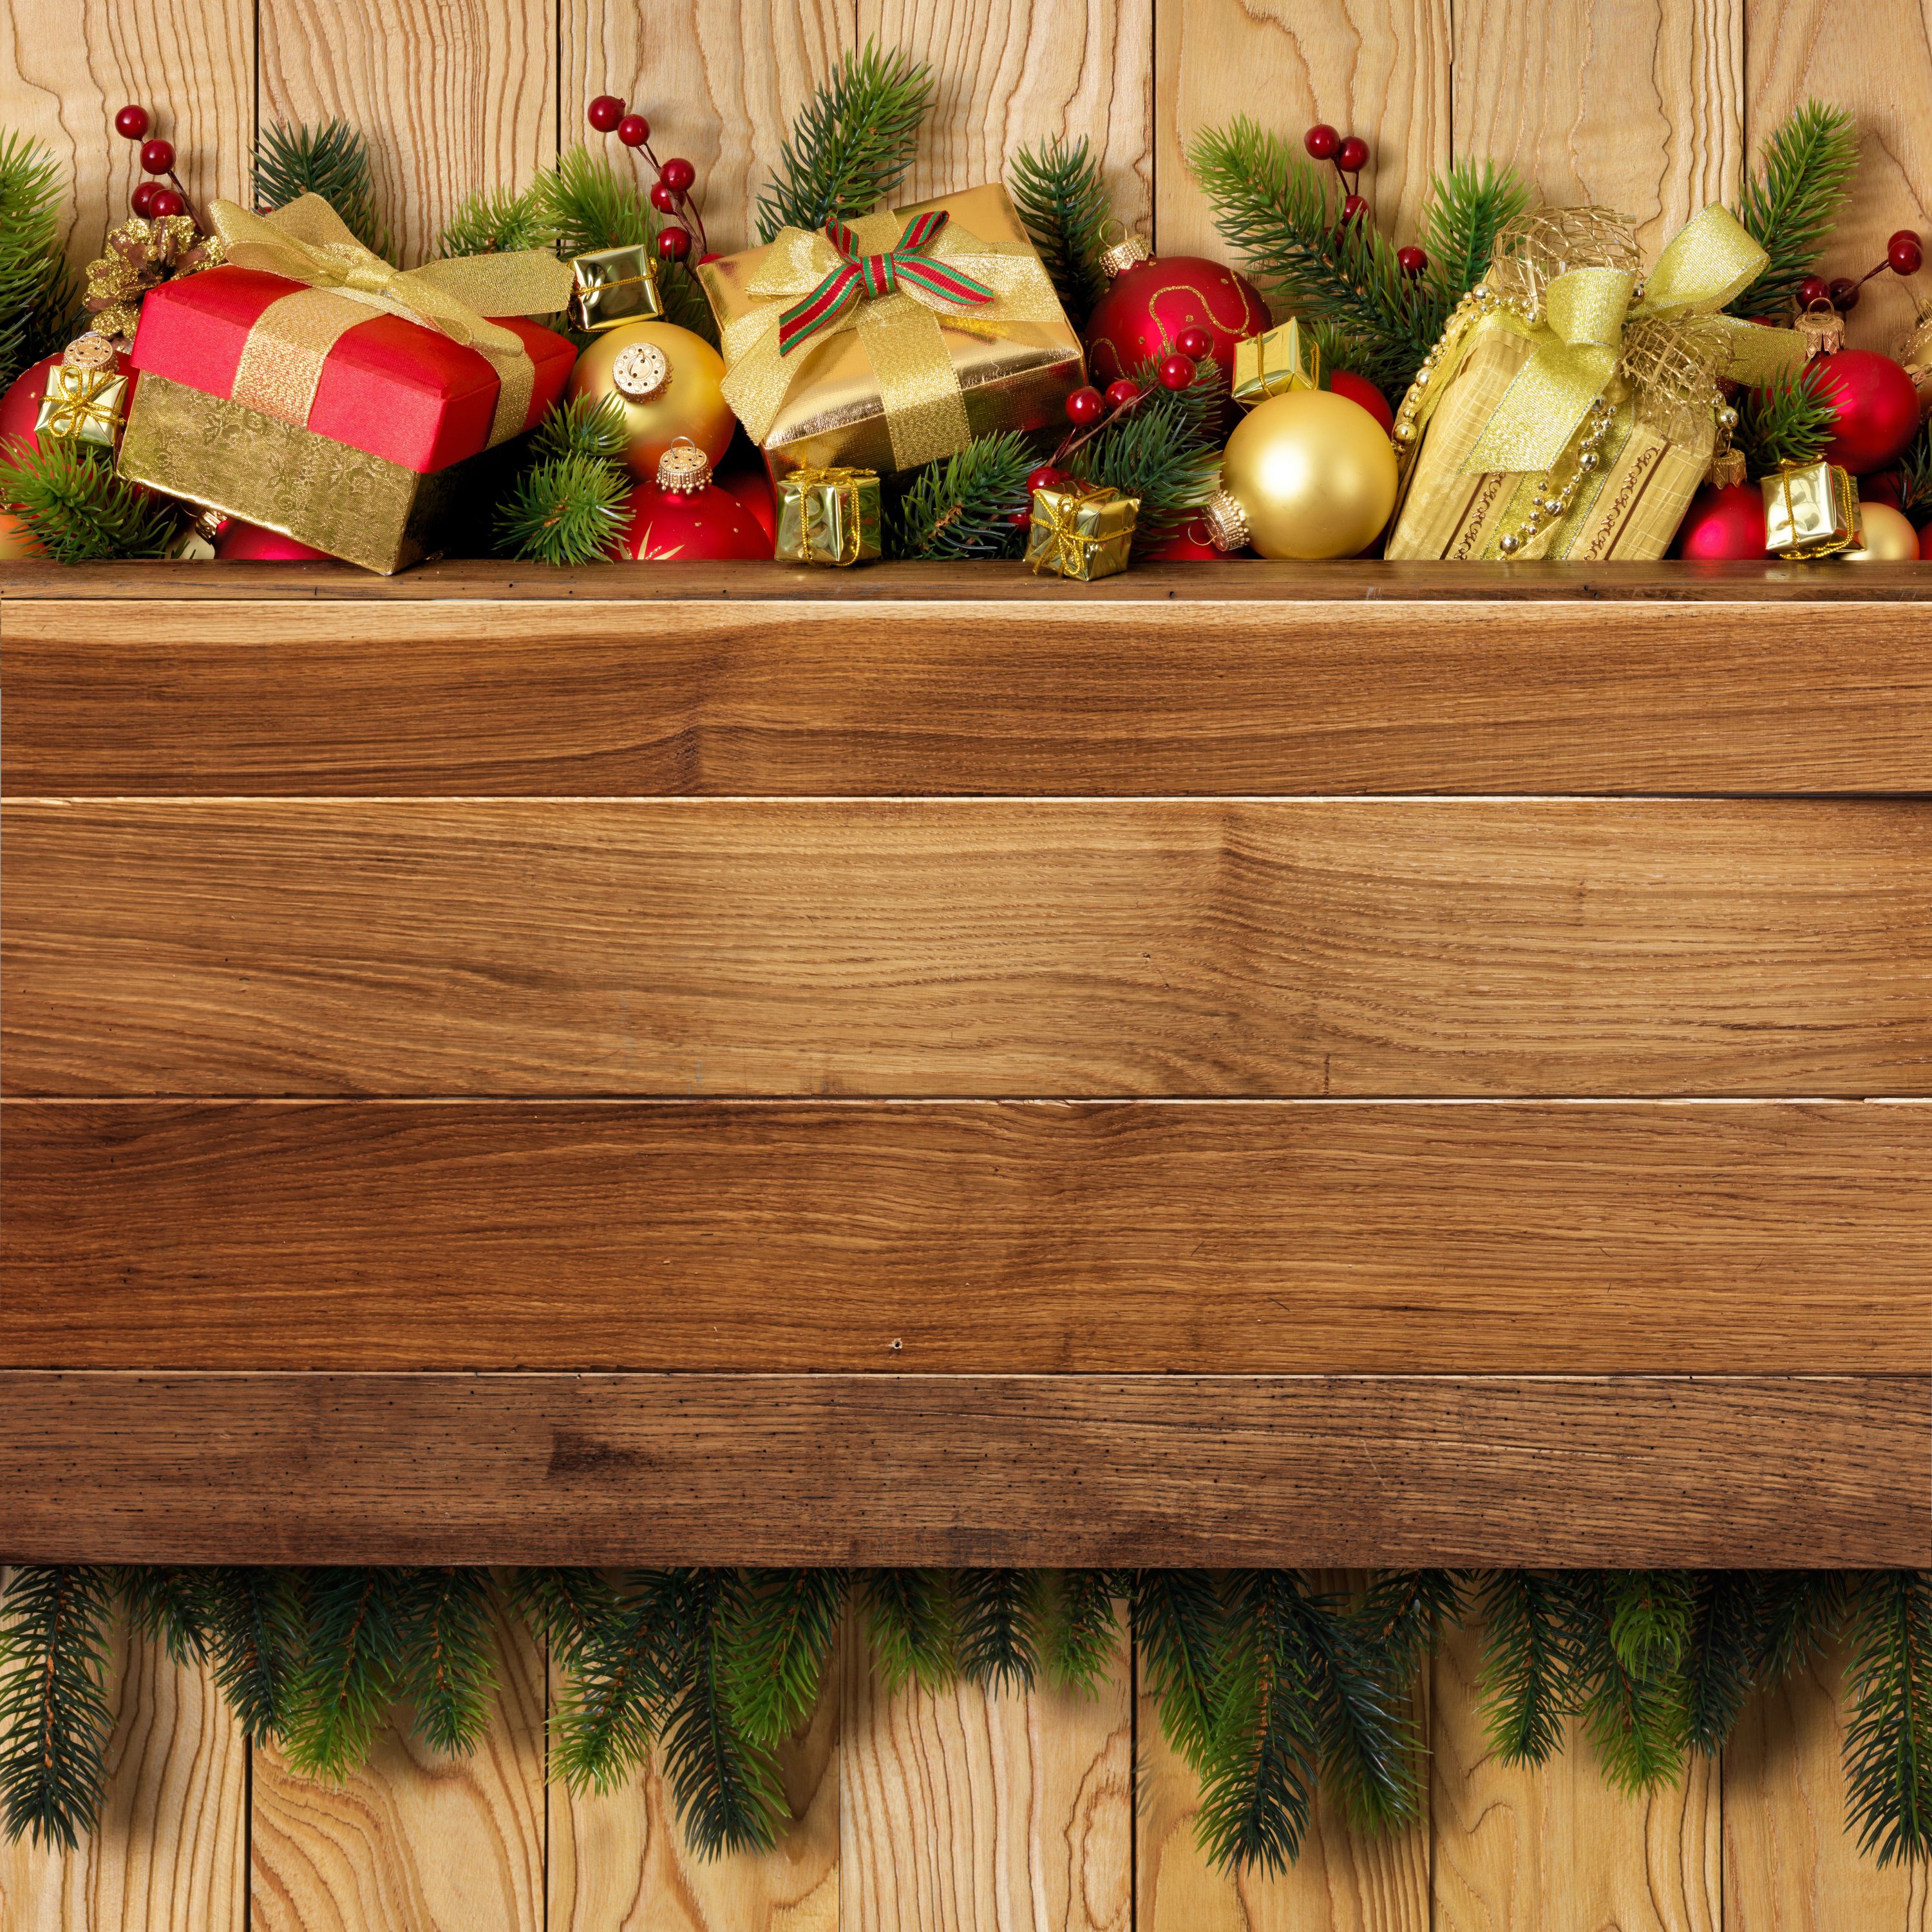 Christmas Wooden Background With Gifts And Decorations Quality Image And Transparent PNG Free Clipart